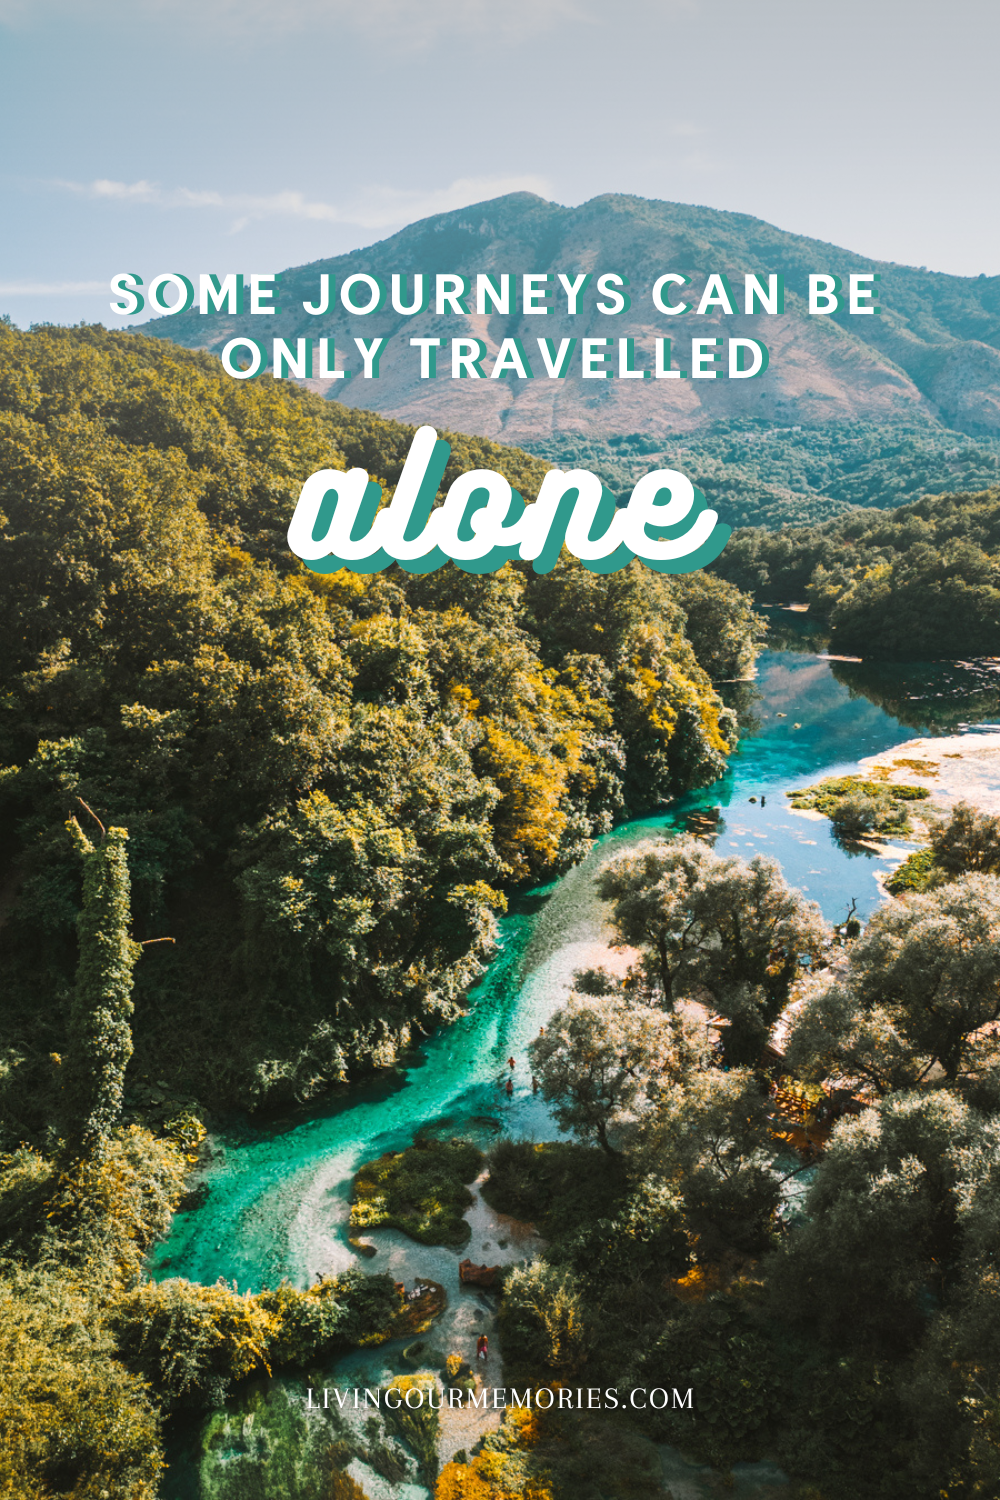 Alone captions for Instagram - Some journeys can only be travelled alone.
